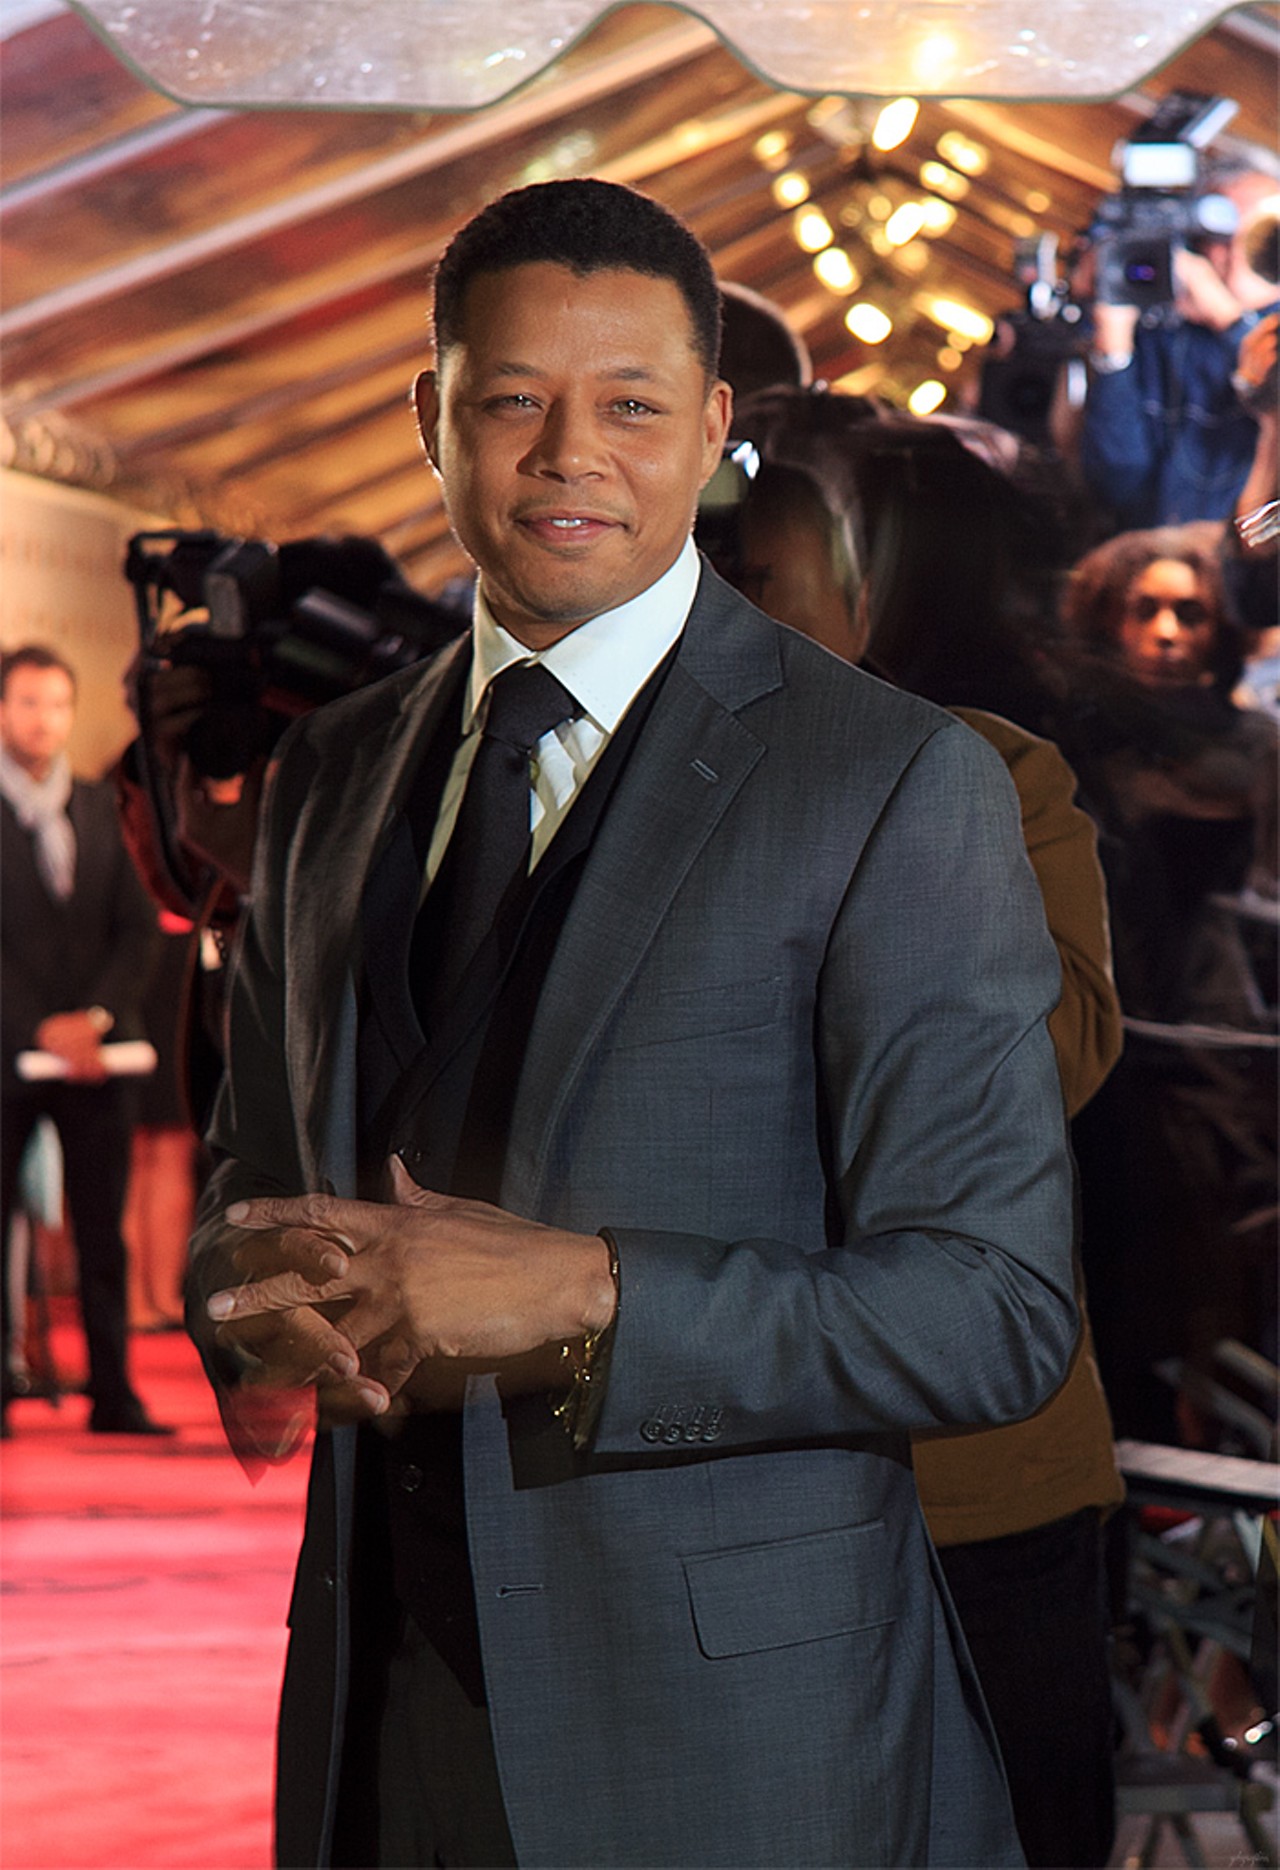 Terrence Howard
Jane Addams Business Careers Center
Terrence Howard has been in many films, but unfortunately he didn&#146;t make it to "Iron Man 2" as James Rhodes.
Photo via 
Gordon Correll/flickr